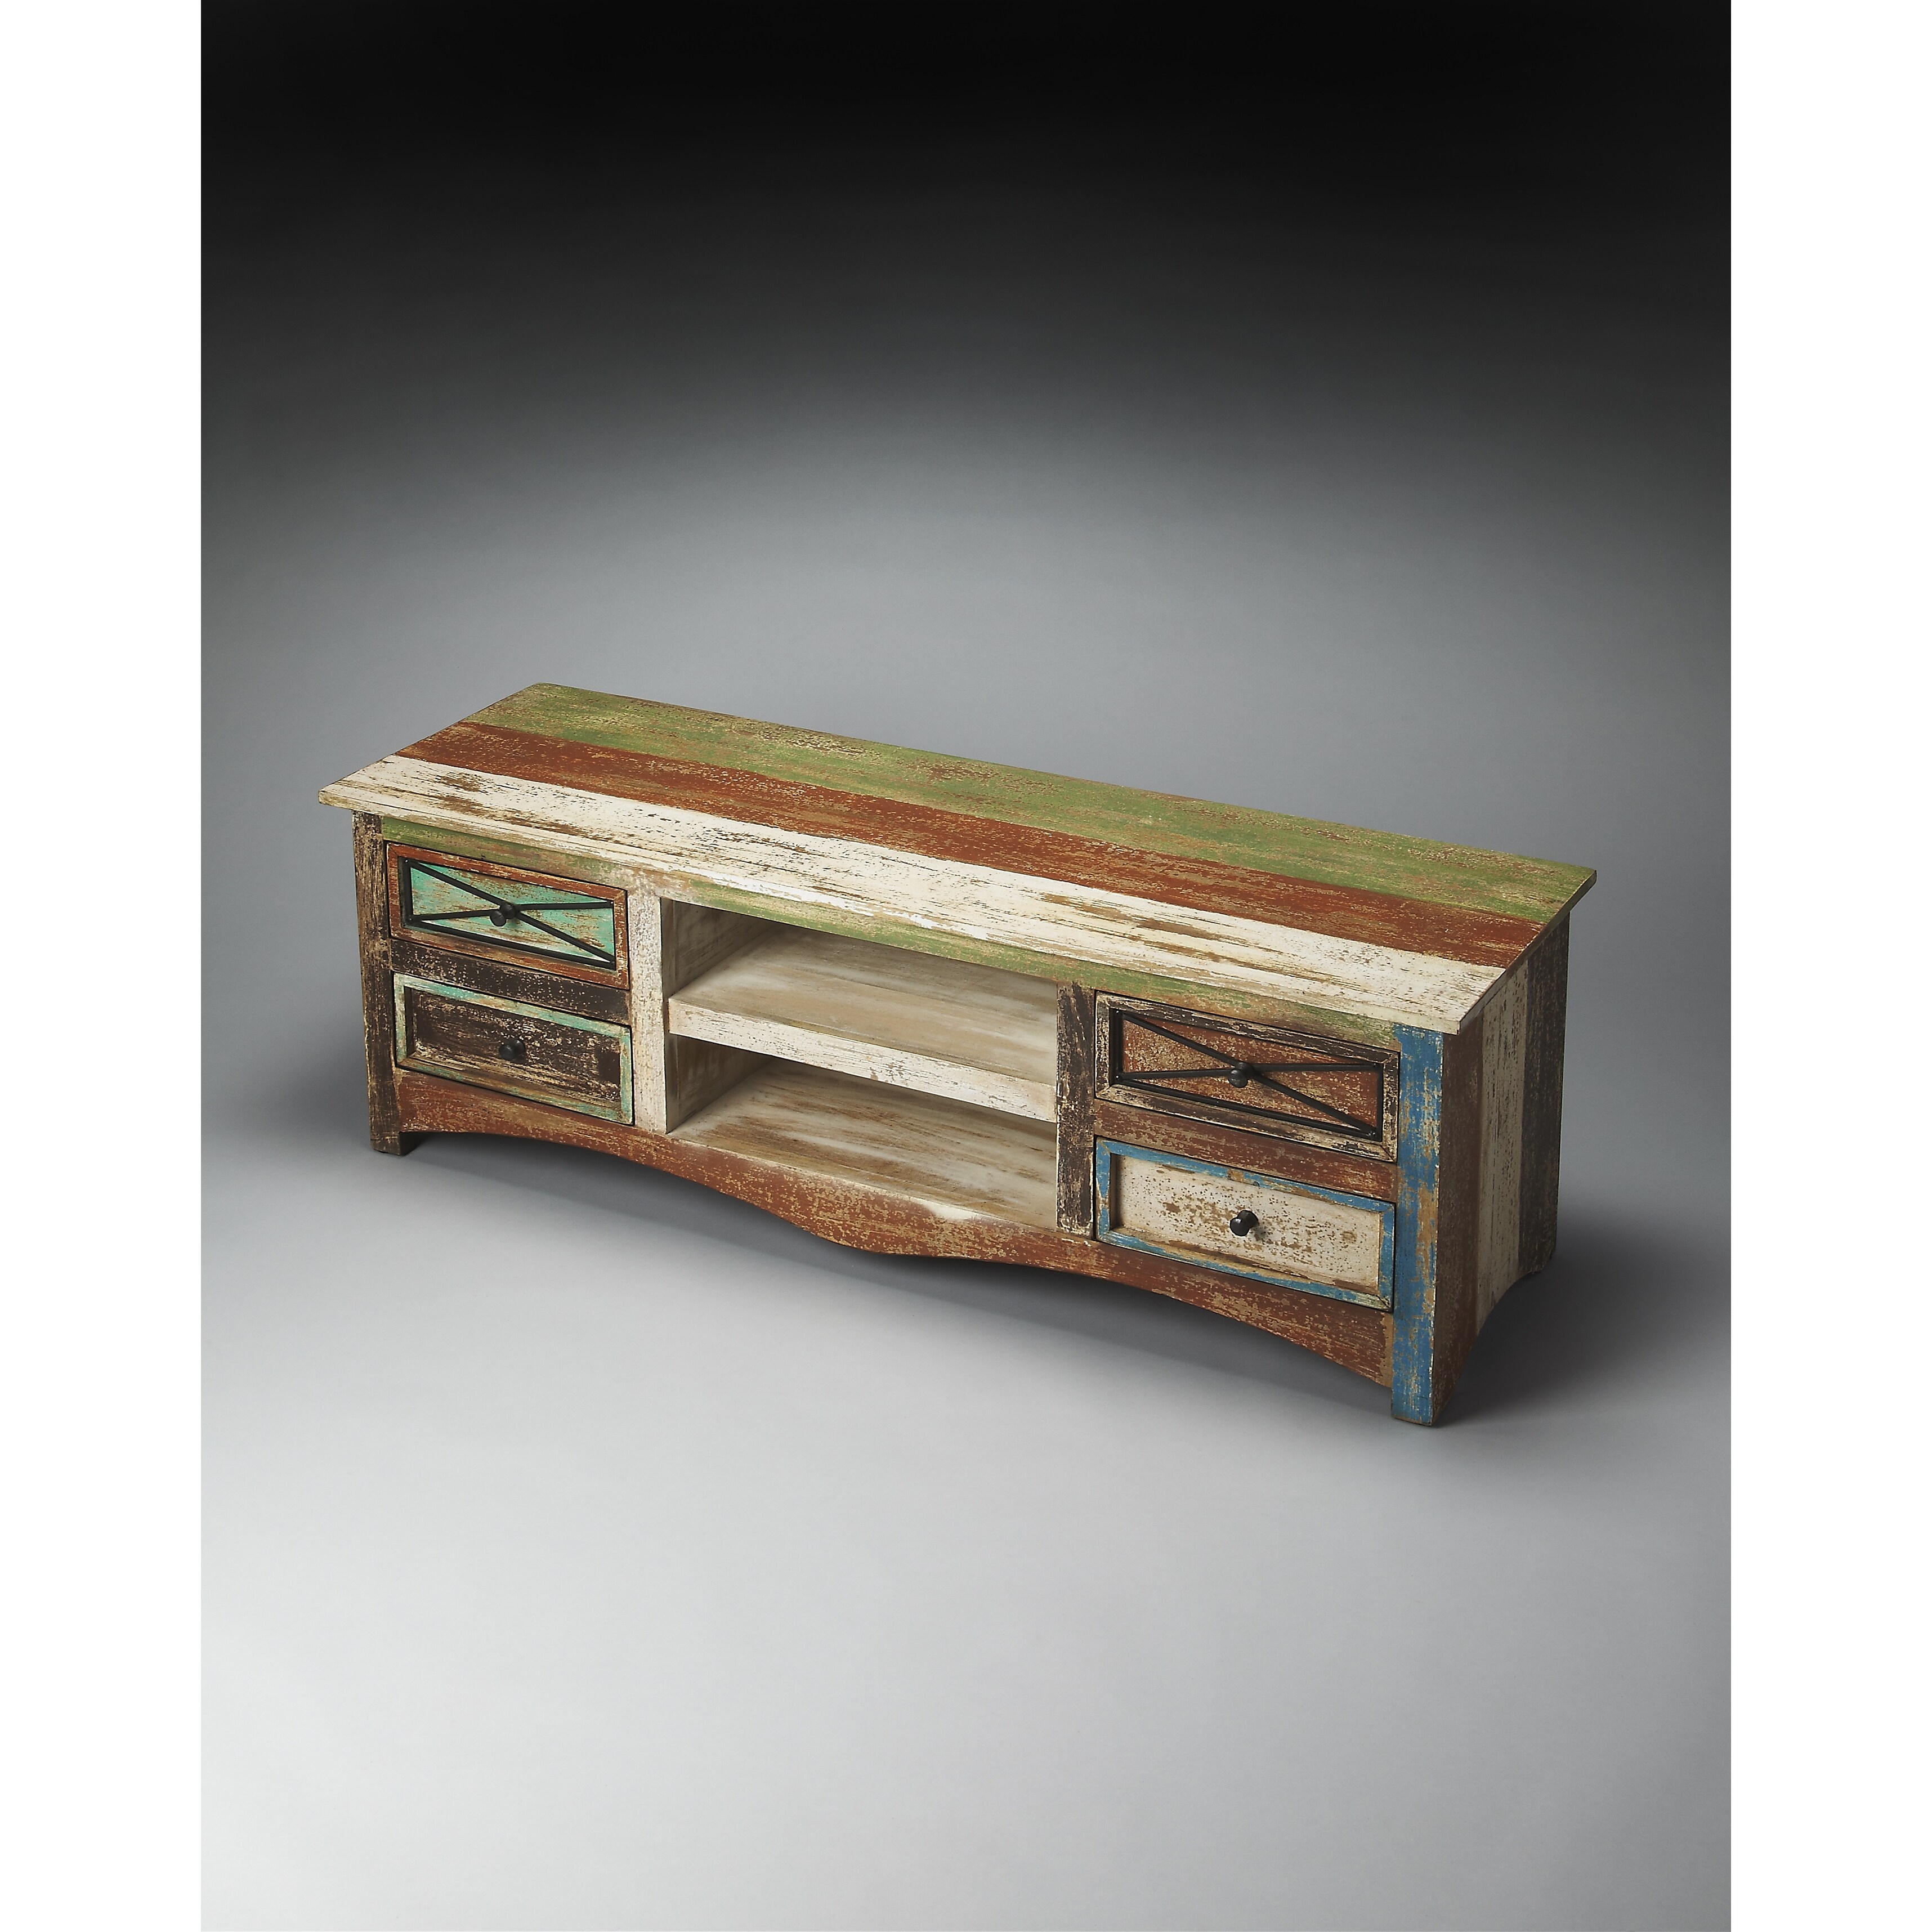 Handmade Butler Decatur Recycled Wood Entertainment Console (India)